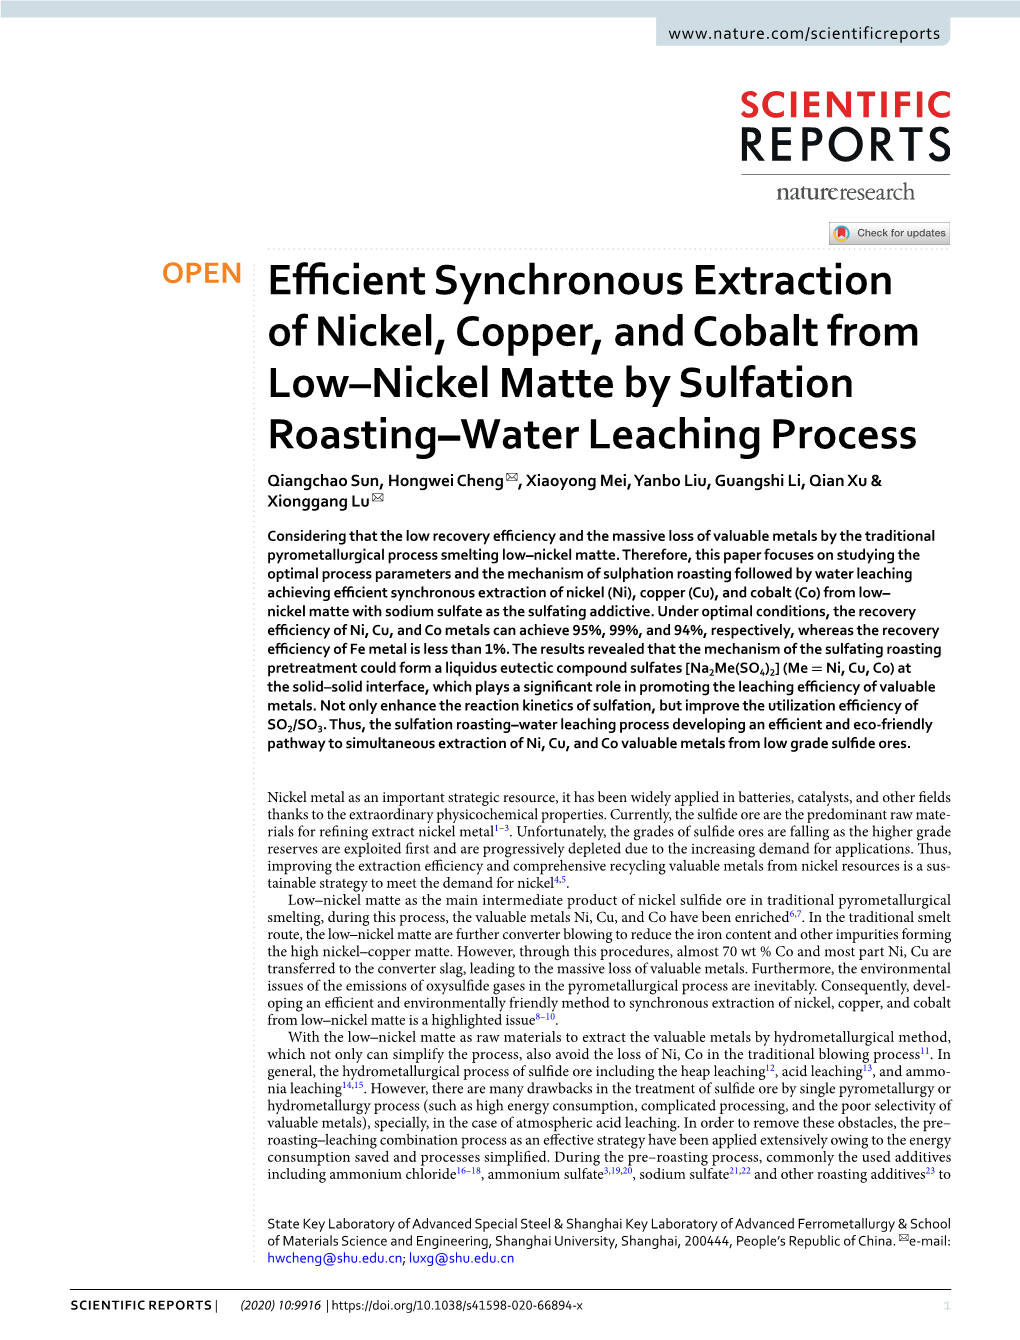 Efficient Synchronous Extraction of Nickel, Copper, and Cobalt